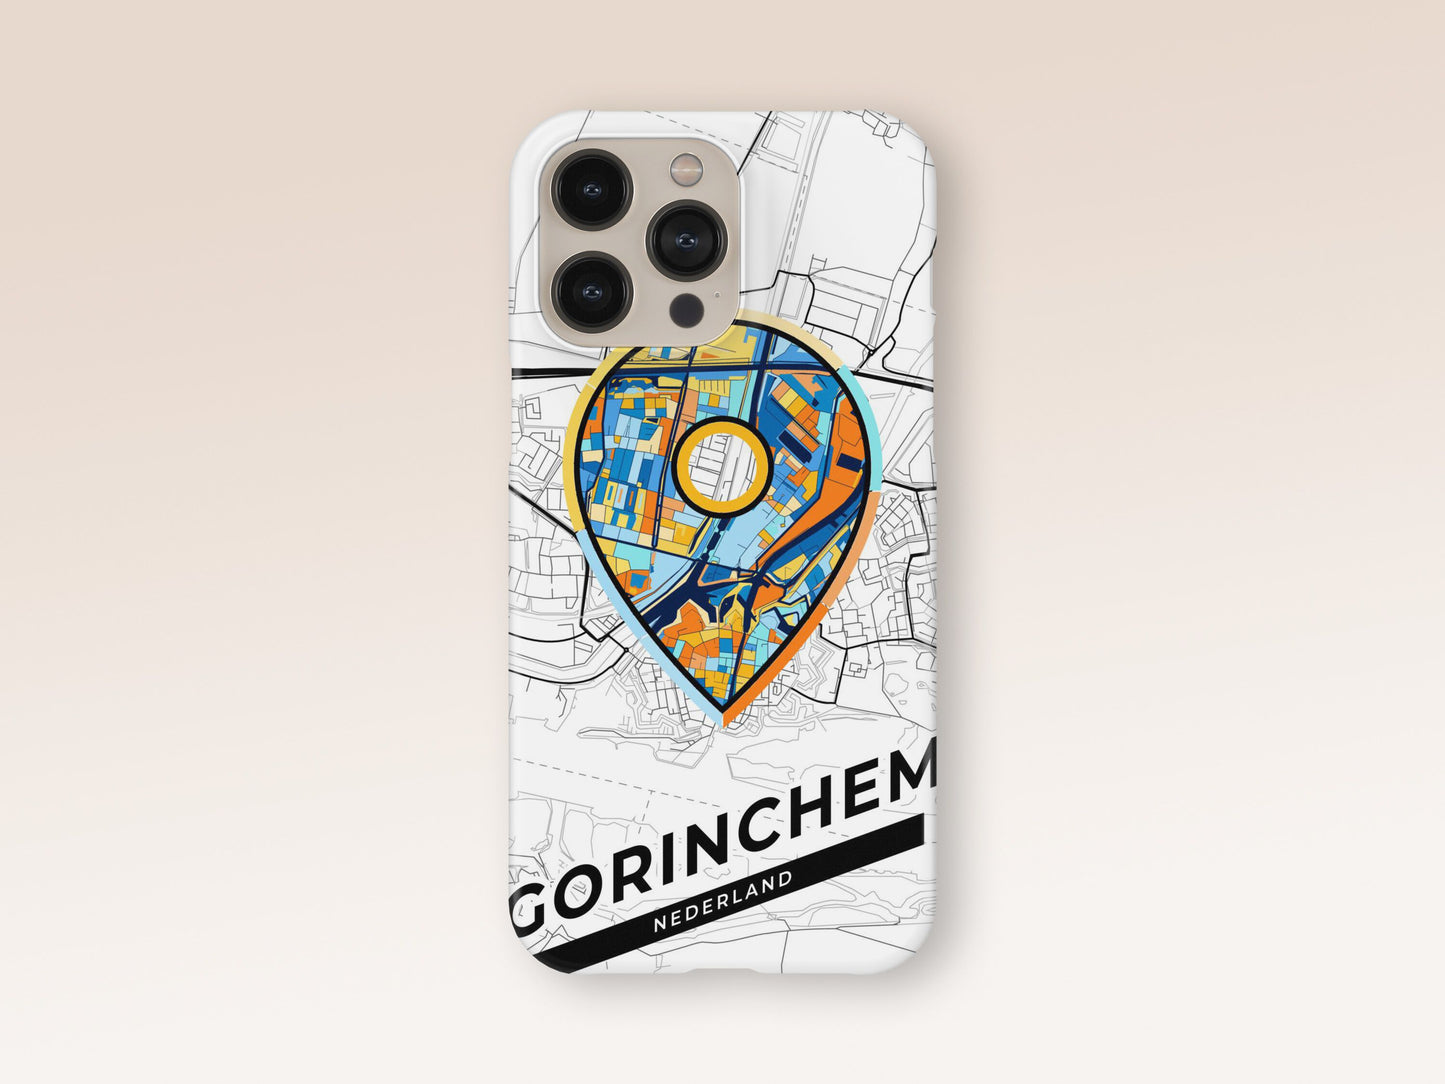 Gorinchem Netherlands slim phone case with colorful icon. Birthday, wedding or housewarming gift. Couple match cases. 1